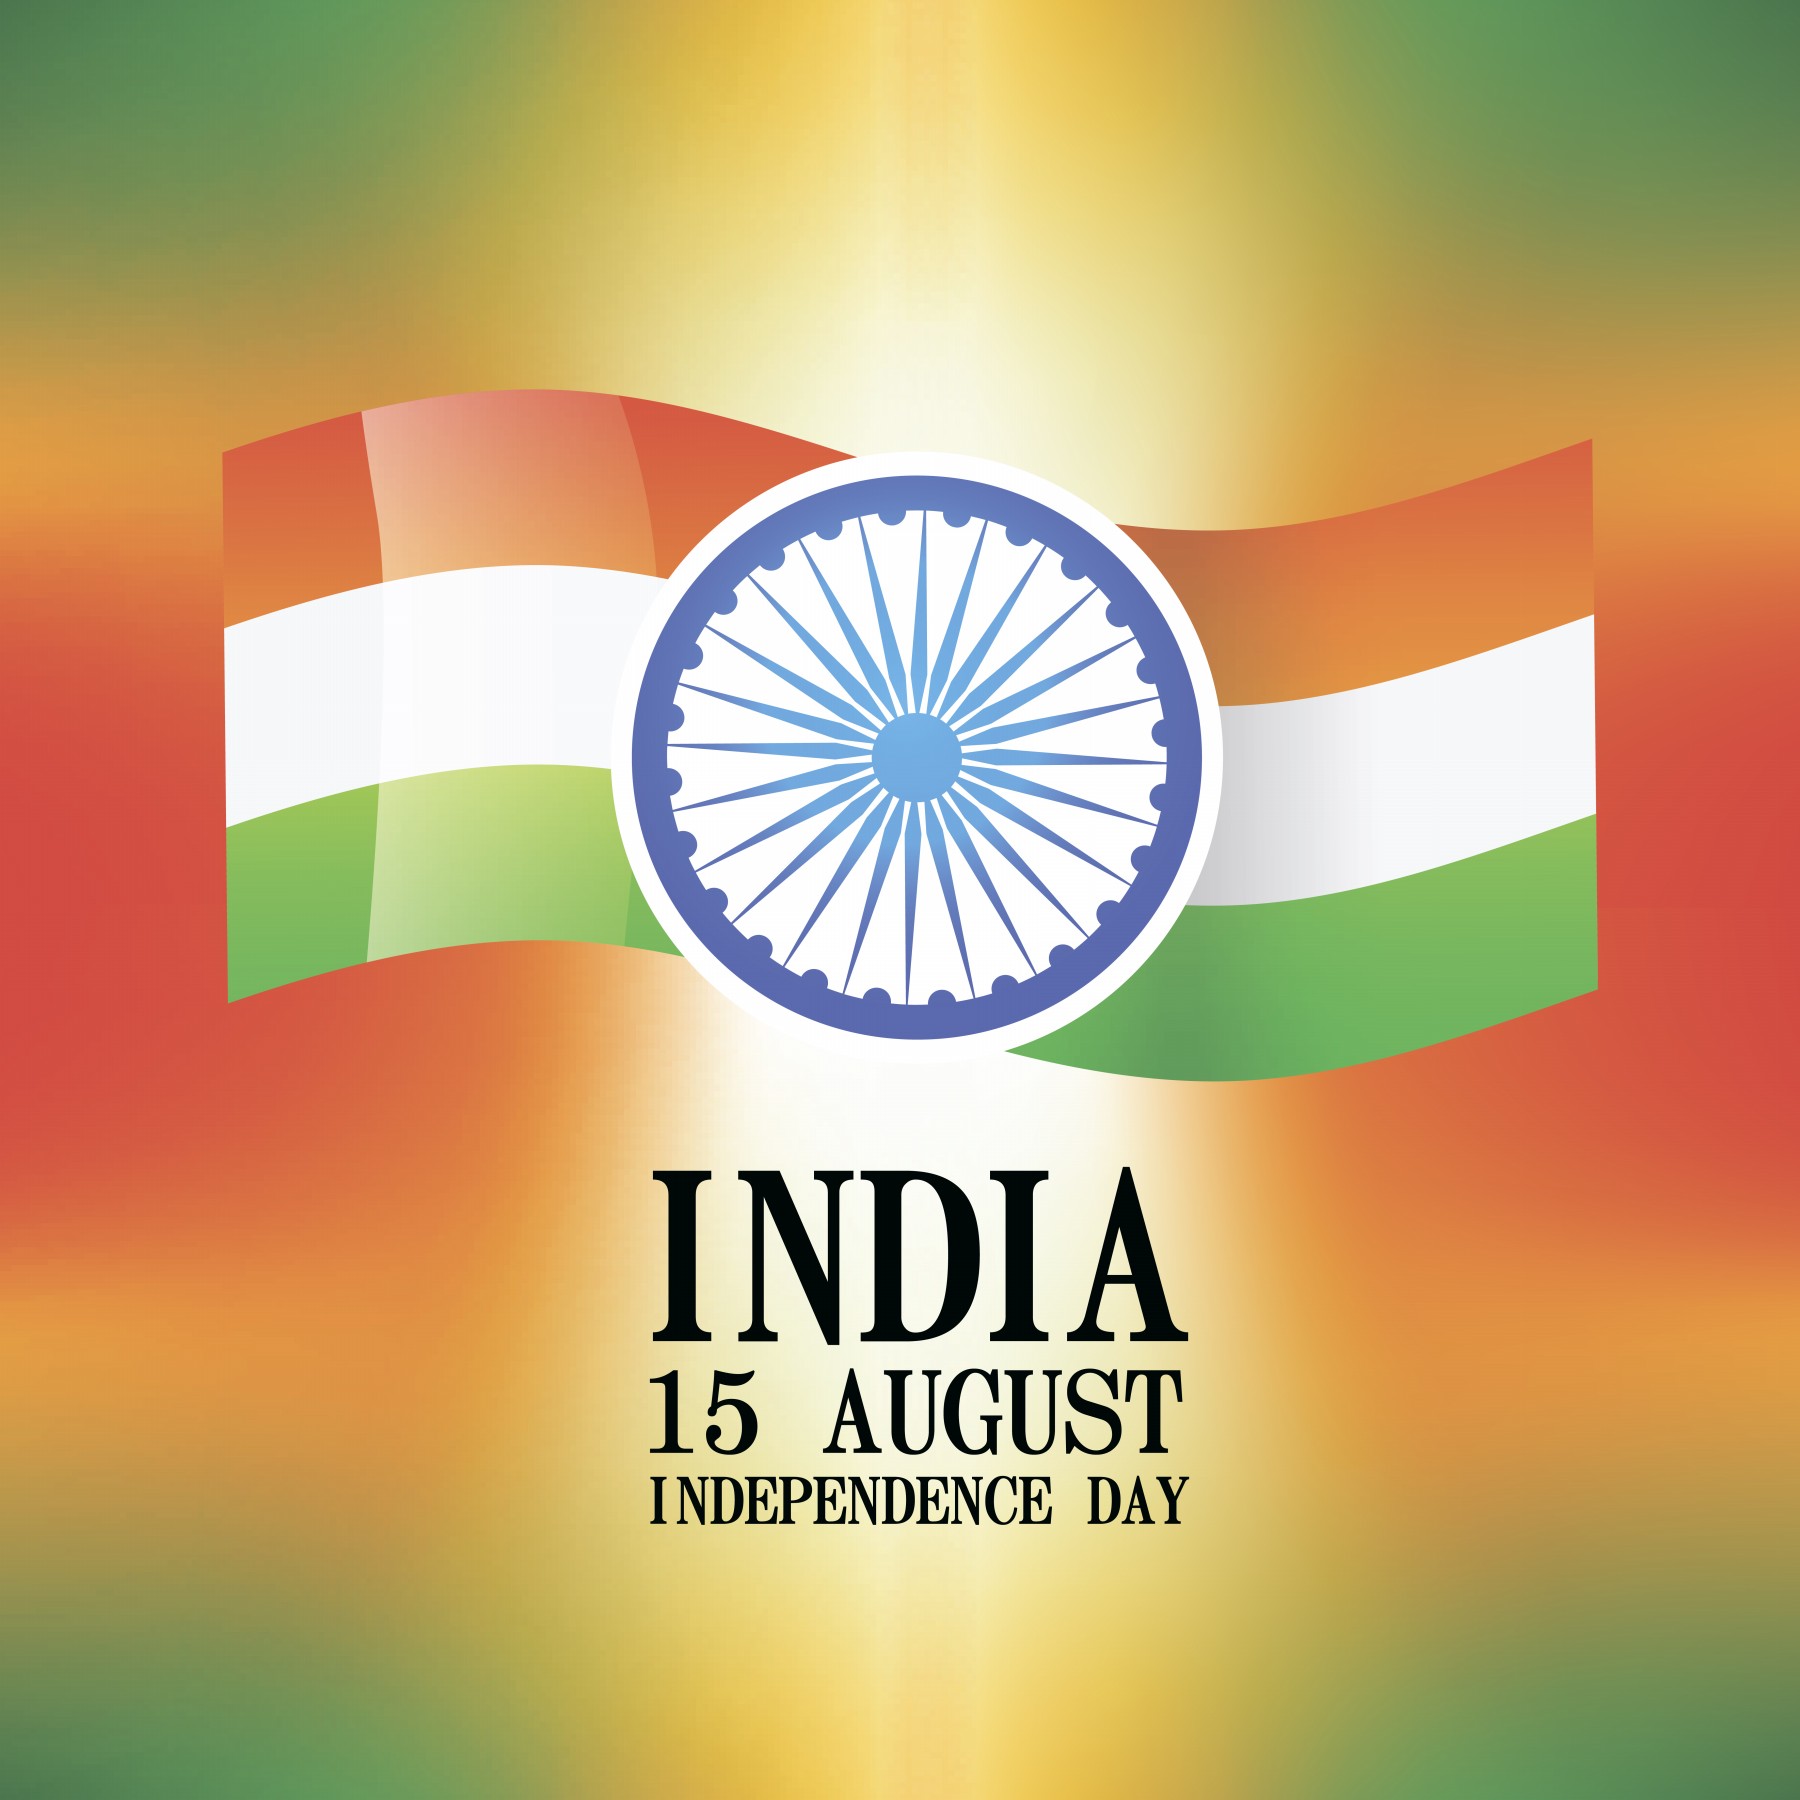 15 Aug As Independence Day - HD Wallpaper 